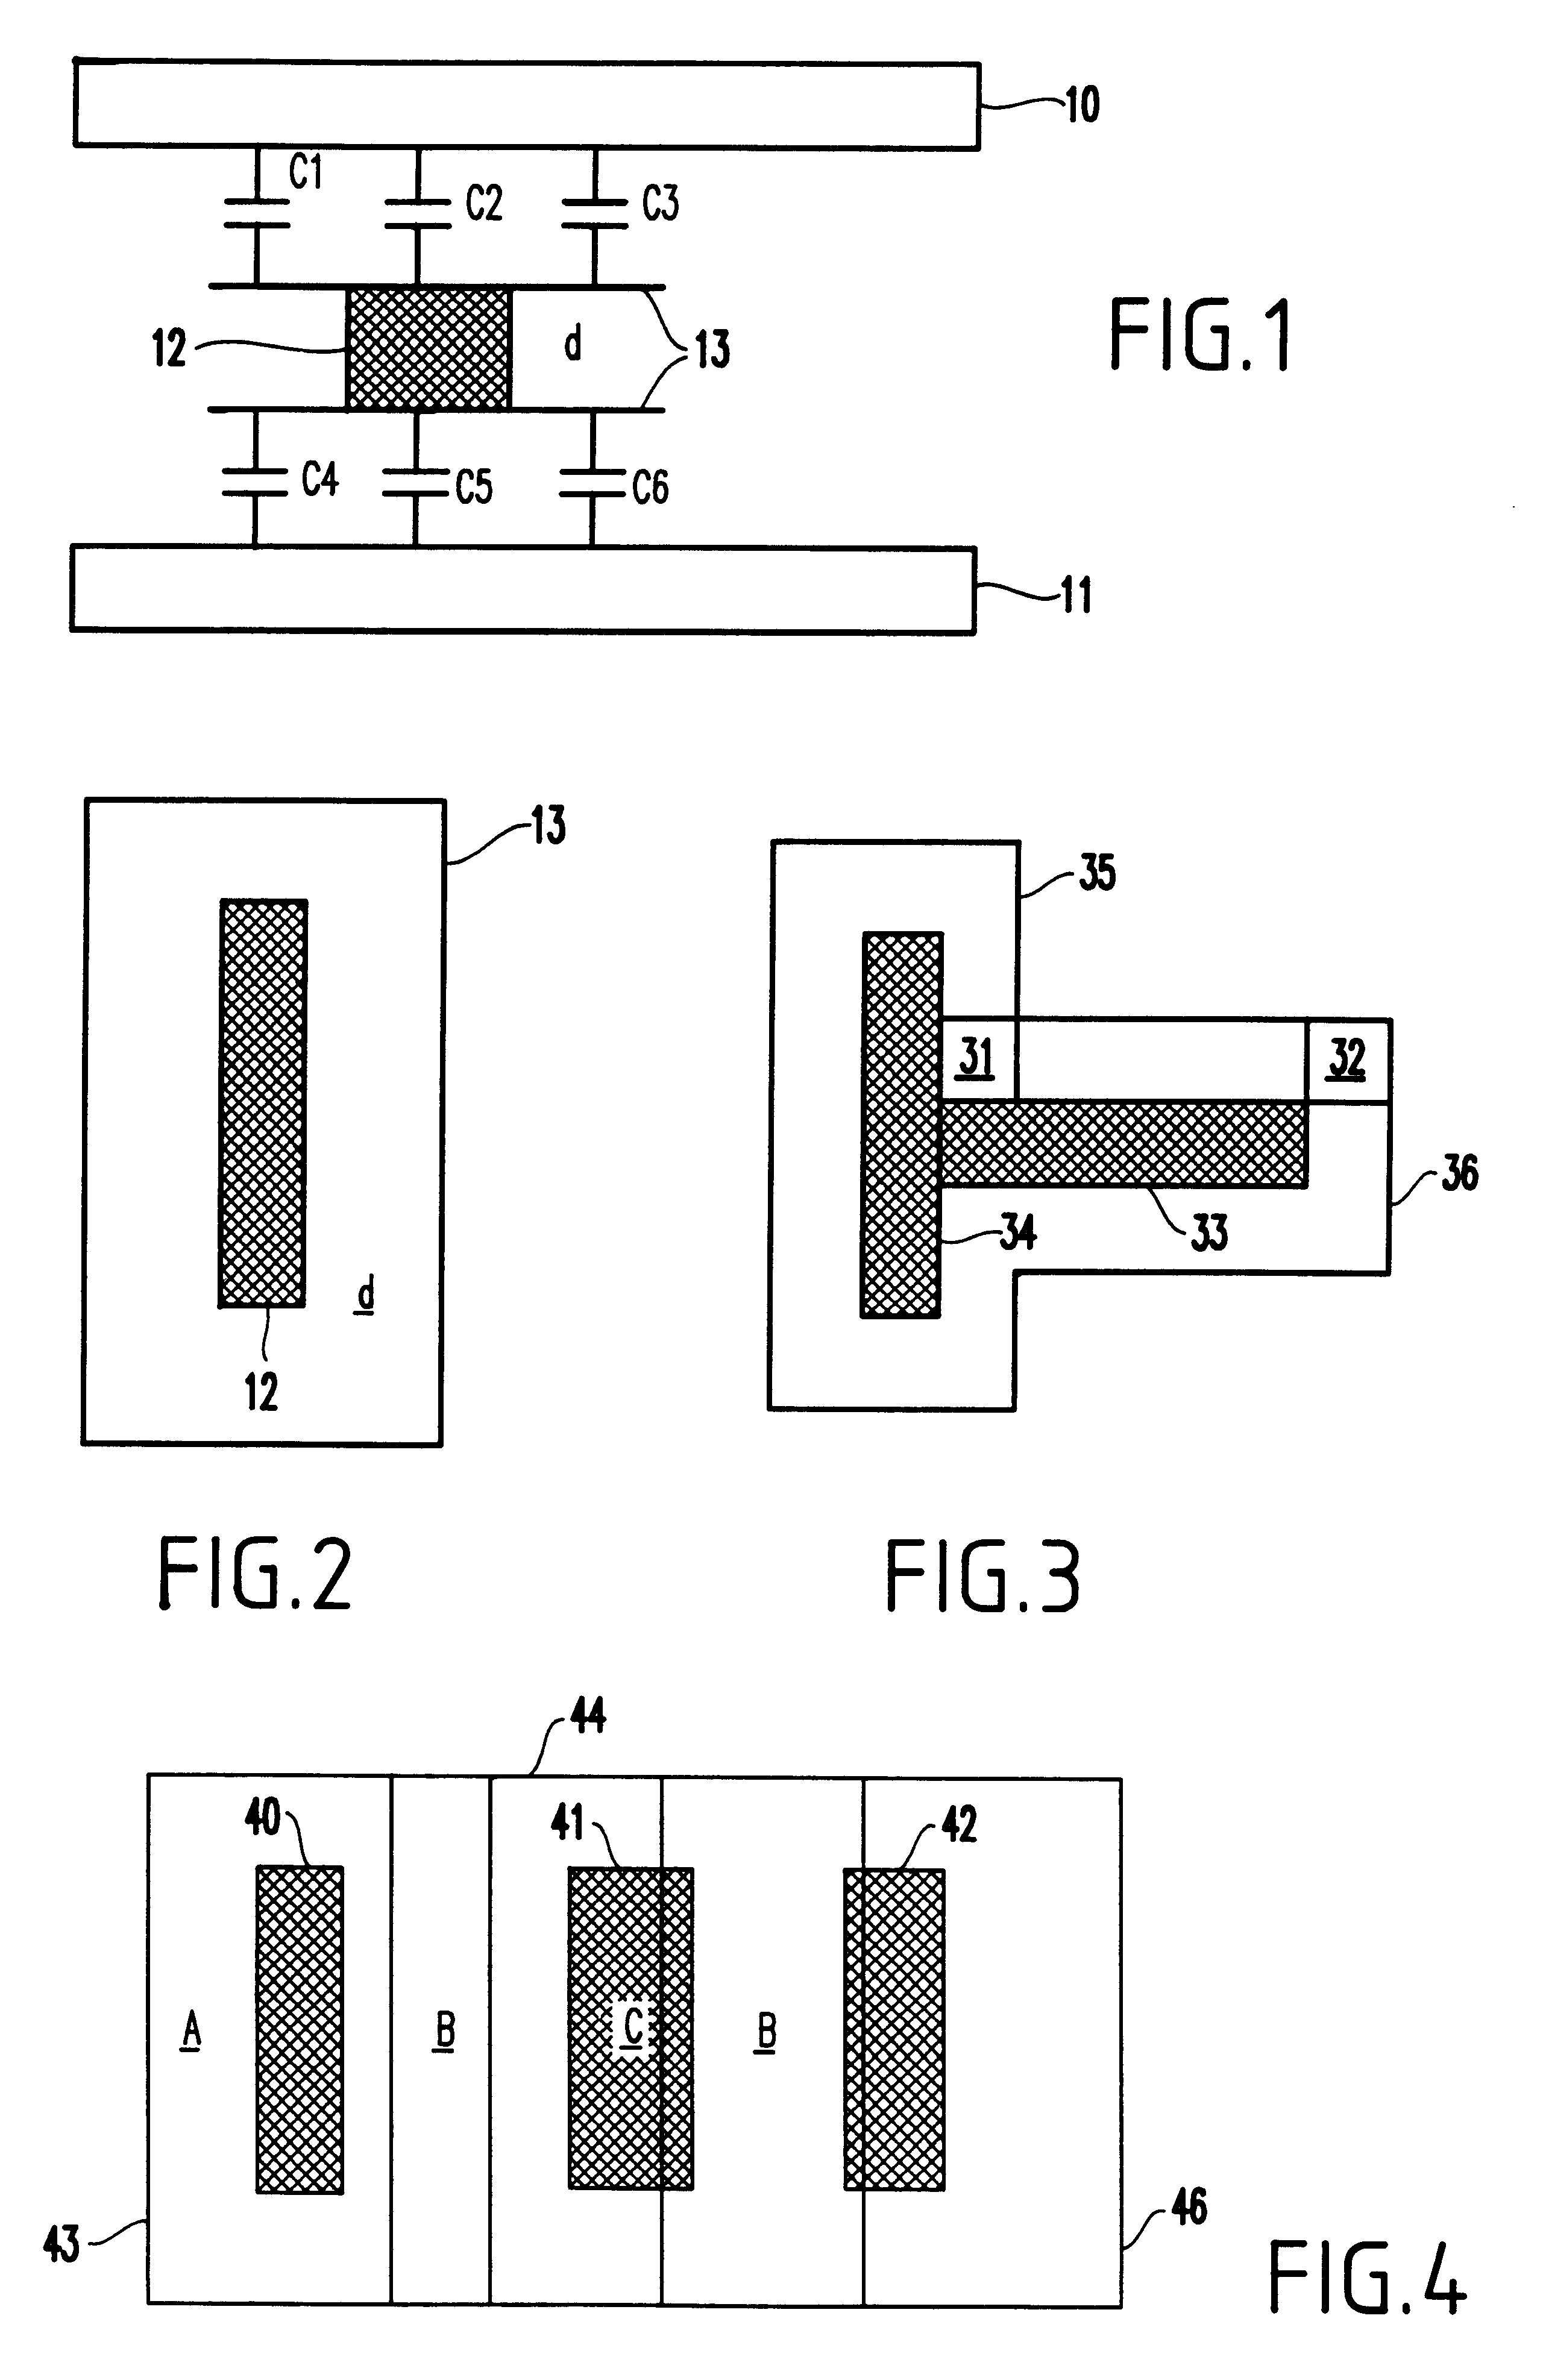 Method of calculating 3-dimensional fringe characteristics using specially formed extension shapes